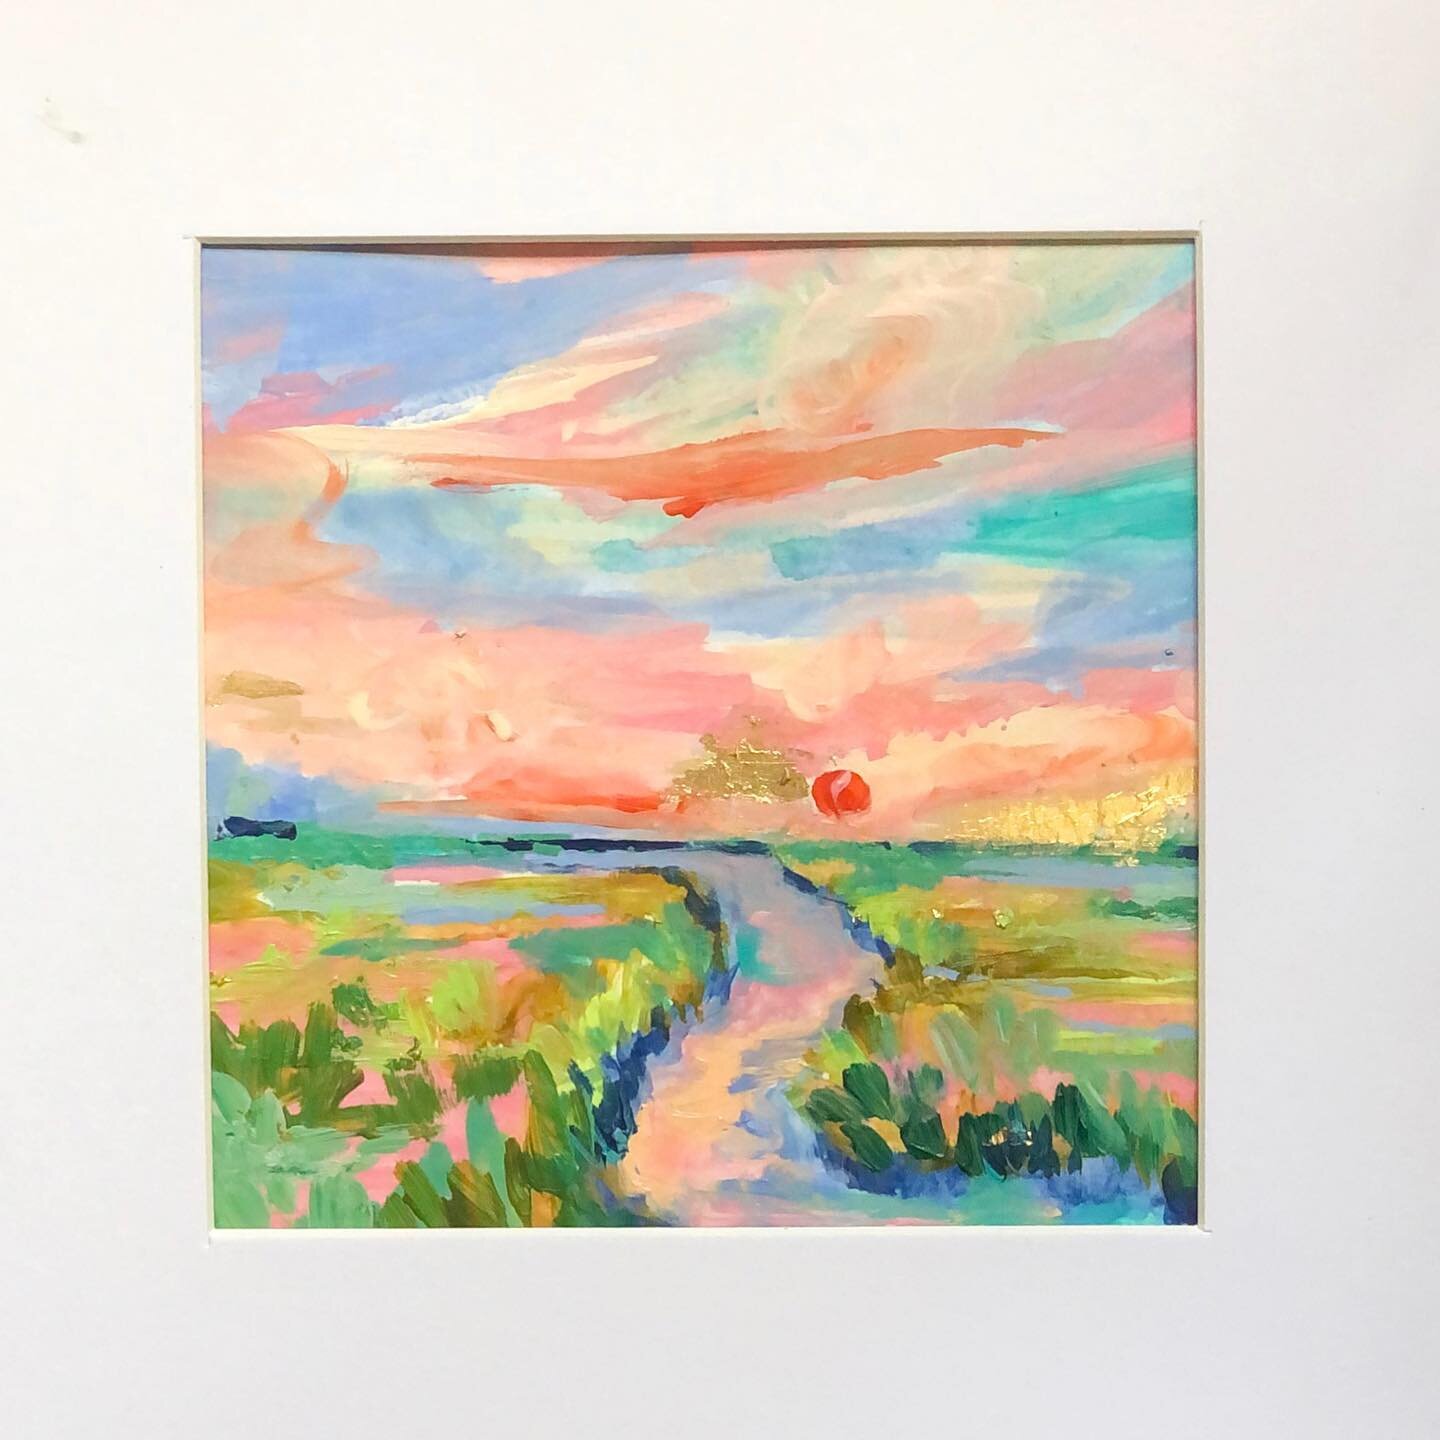 Can&rsquo;t believe the week is coming to a close. It always goes by too quickly. Ready to get home and launch my summer collection on July 29!🤩
.
.
.
.
.
#Lowcountry #lowcountrylife #lowcountrystyle #coastalart #coastaldecor #coastalliving #marshpa